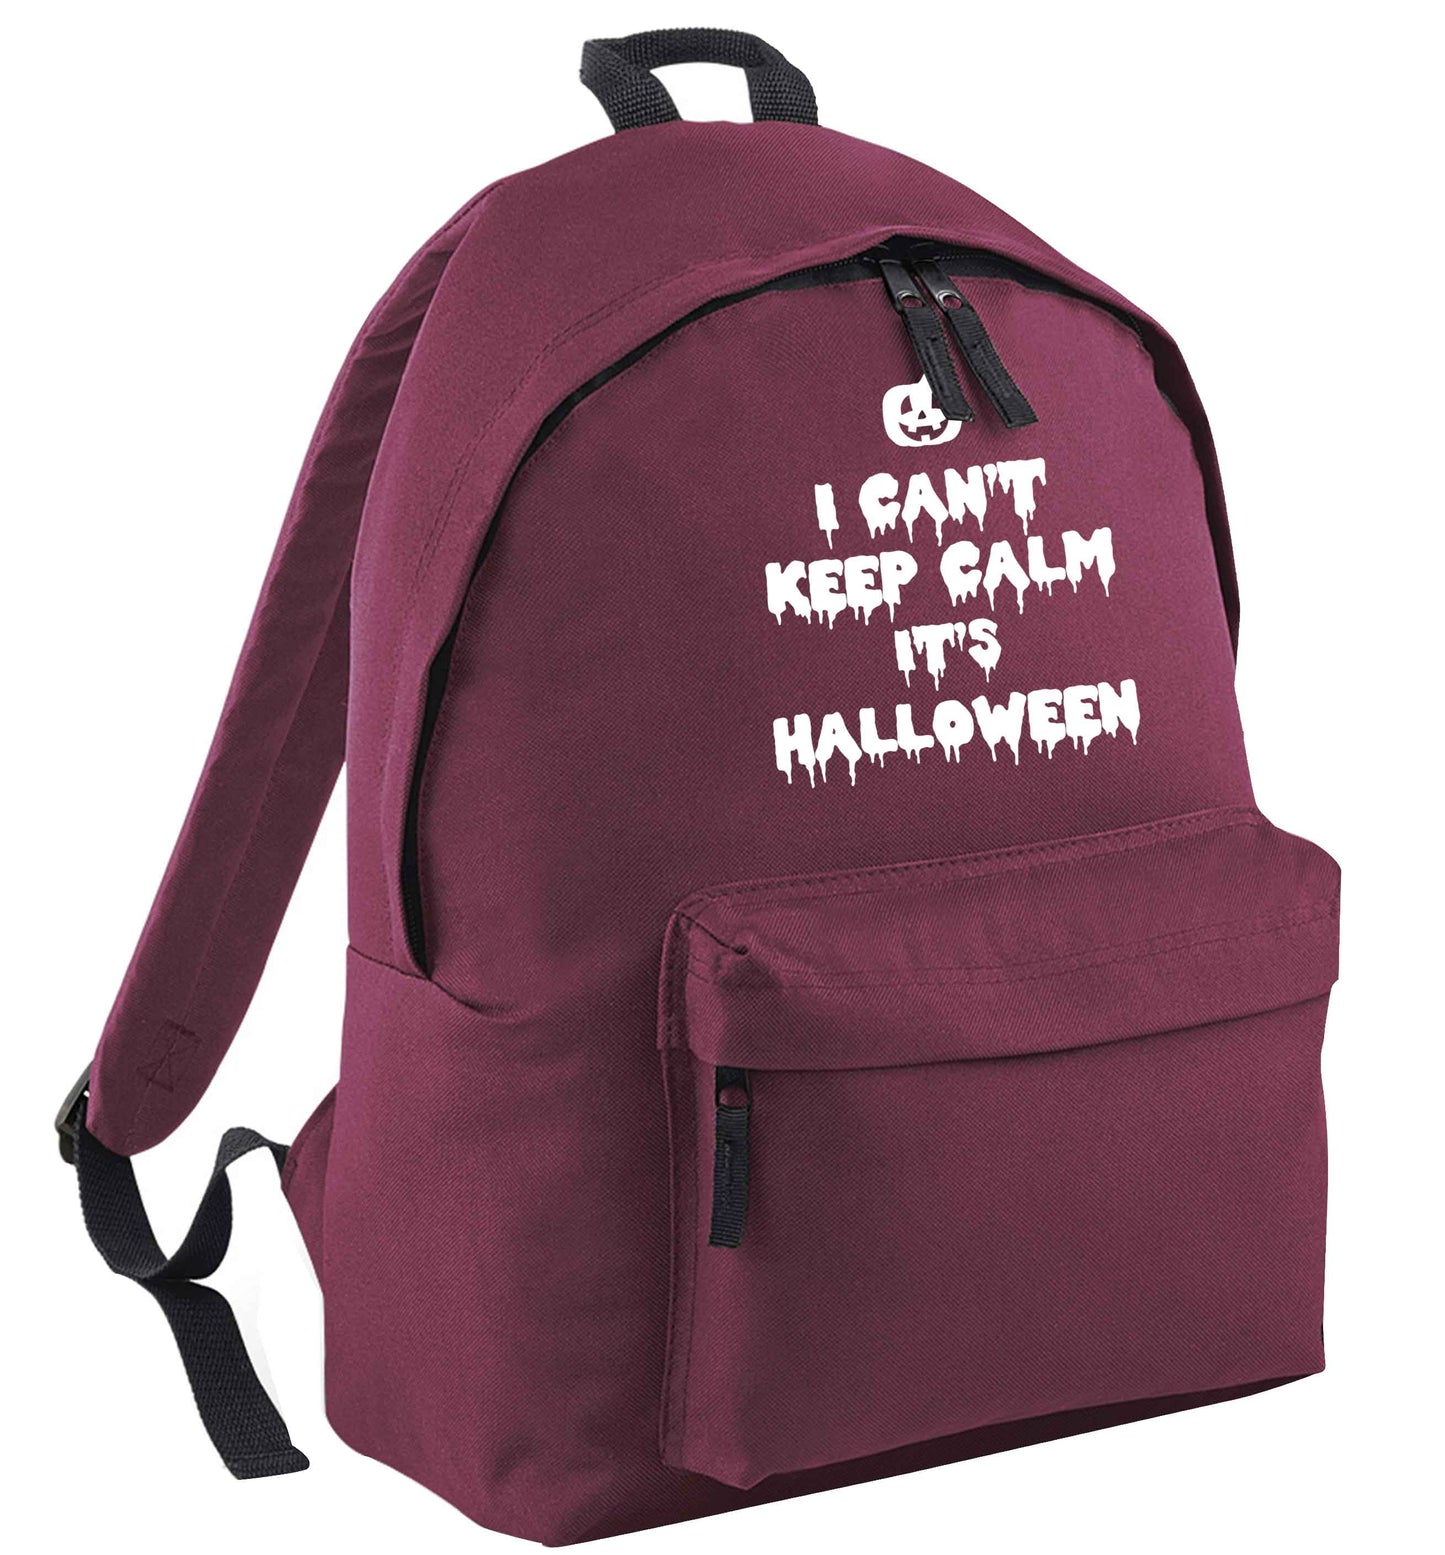 I can't keep calm it's halloween | Children's backpack